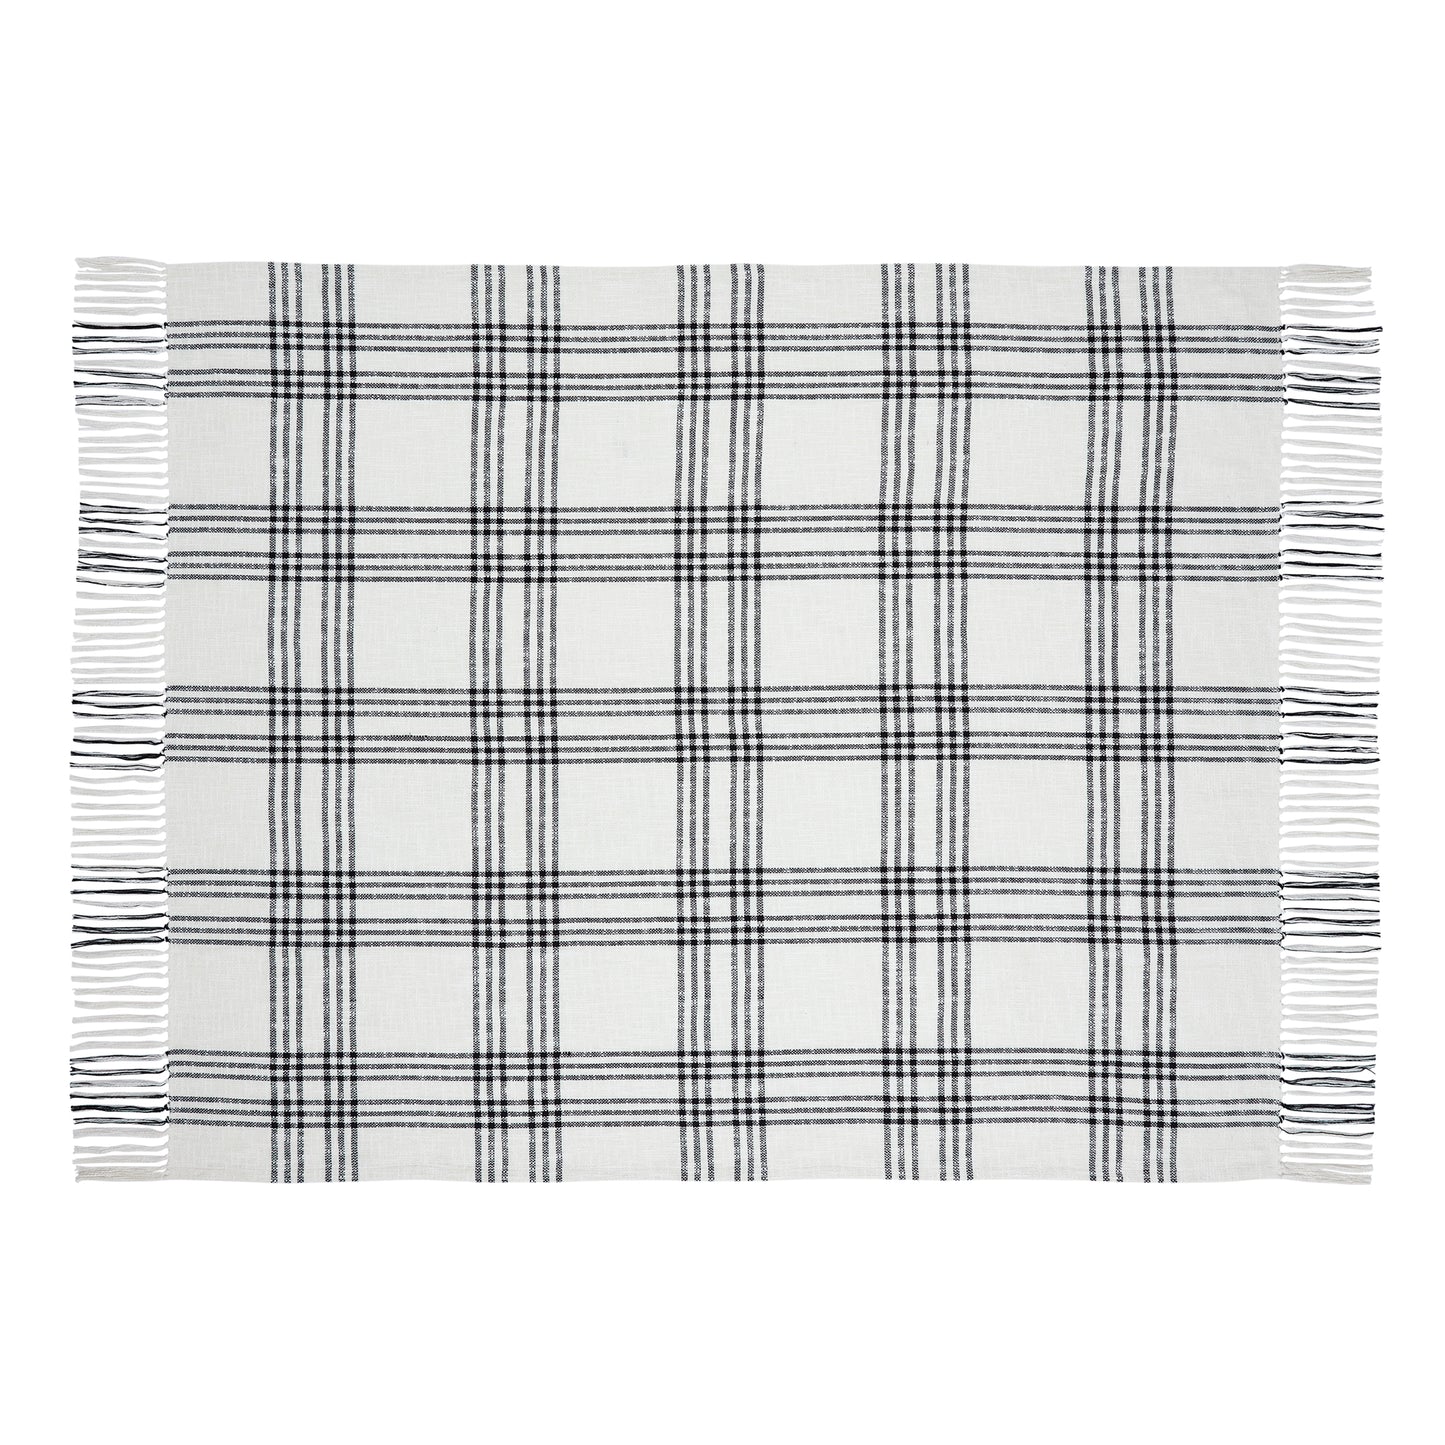 Black Plaid Woven Blanket Laid Out